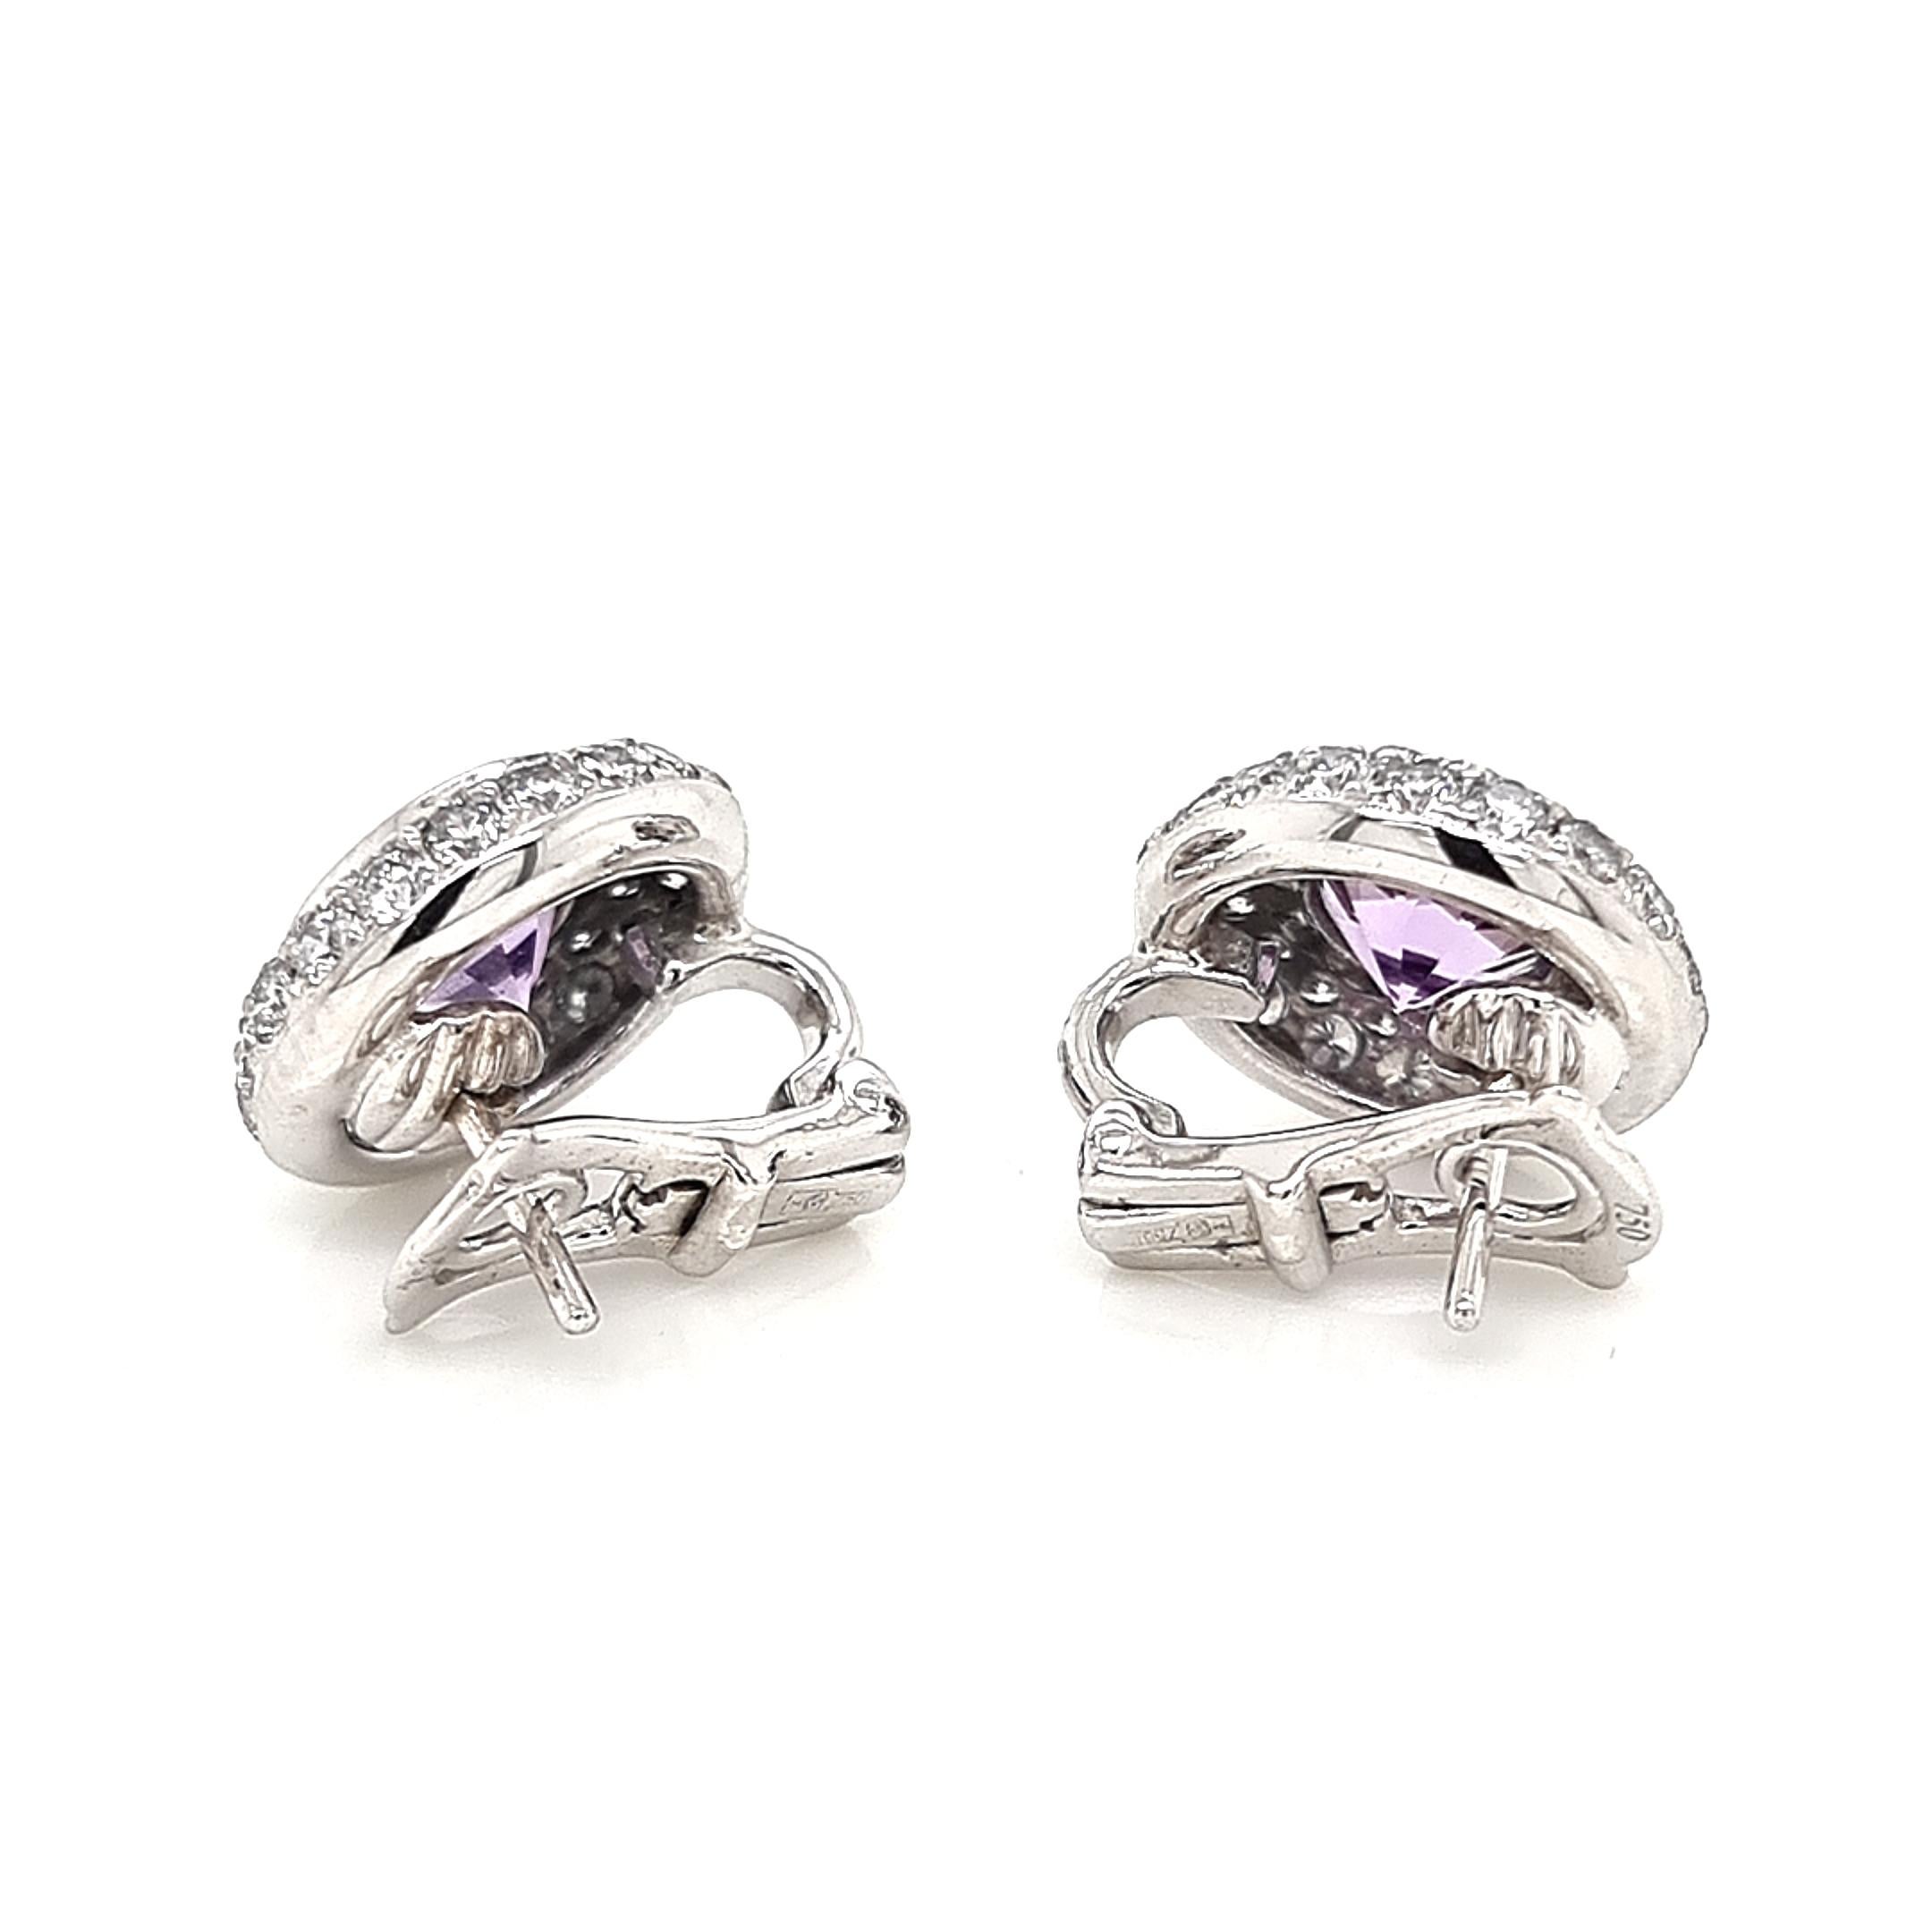 Indulge in the allure of these elegant earrings, meticulously crafted from opulent 18K white gold. At their center lies a resplendent round amethyst, exuding a regal purple hue that captivates the beholder. The amethysts are embraced by a halo of